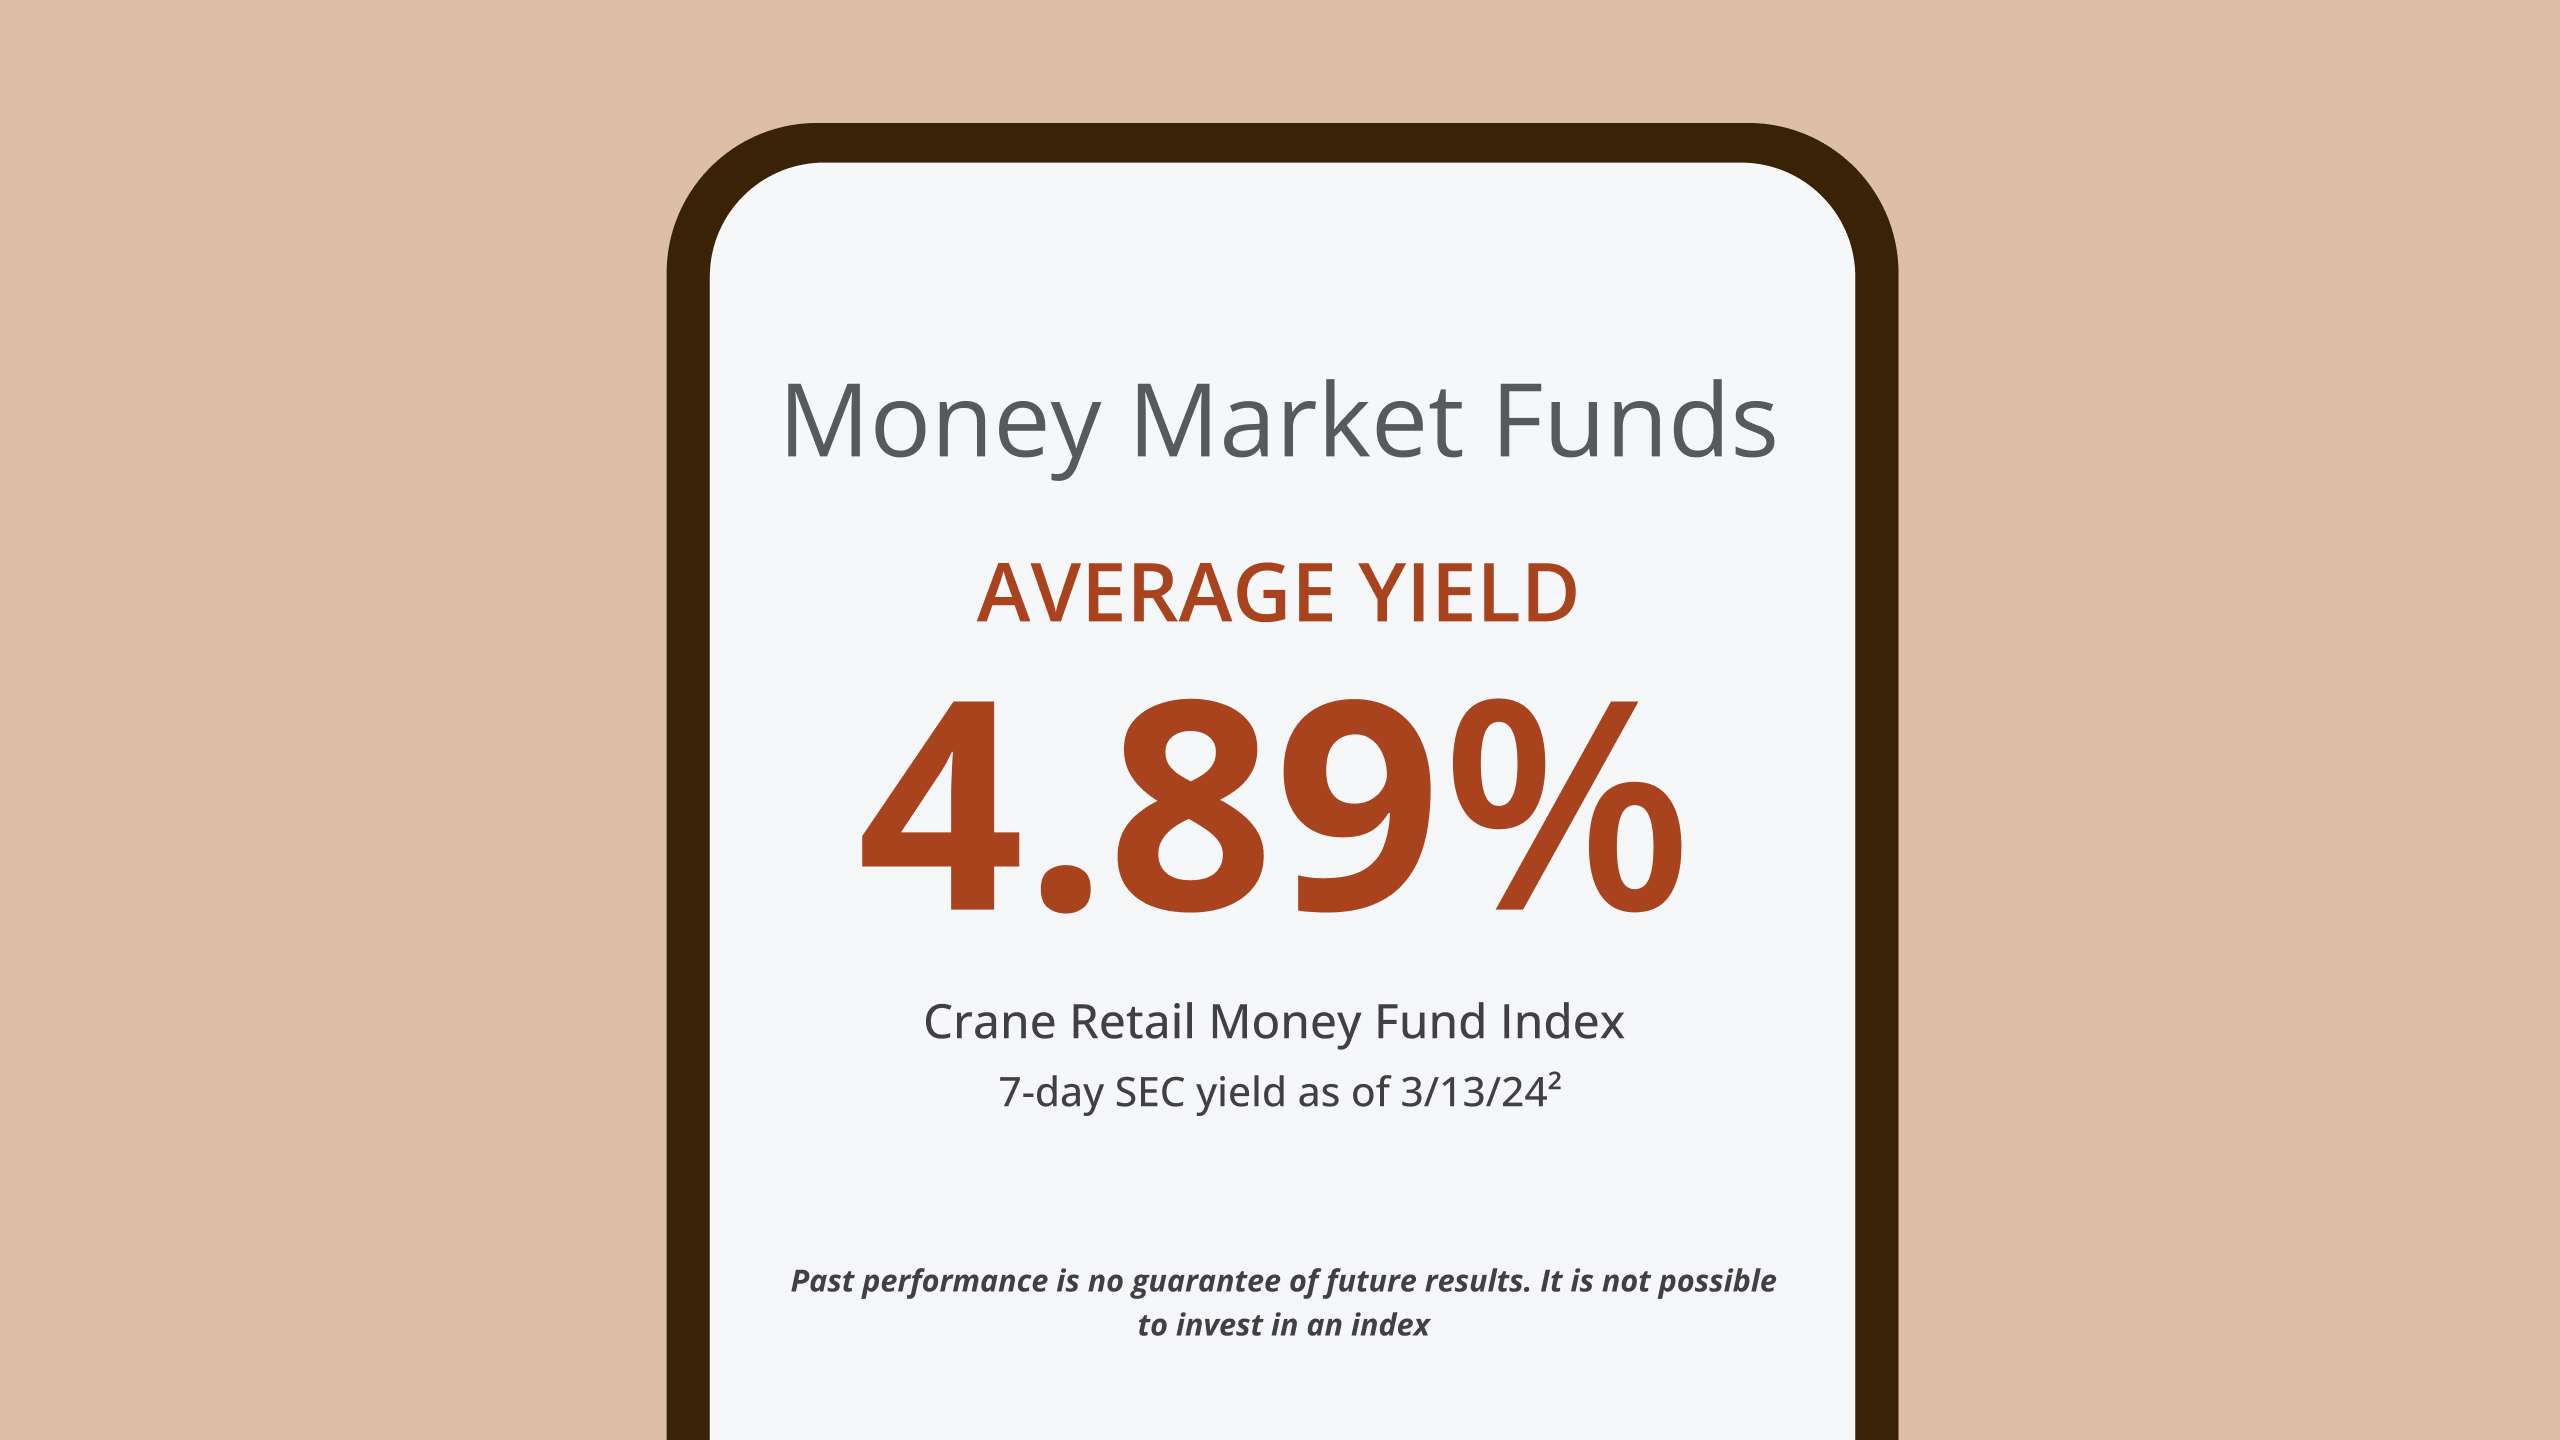 Money market funds 4.89% avg yield as per Crane data. Past performance is no guarantee of future results. It is not possible to invest in an index.